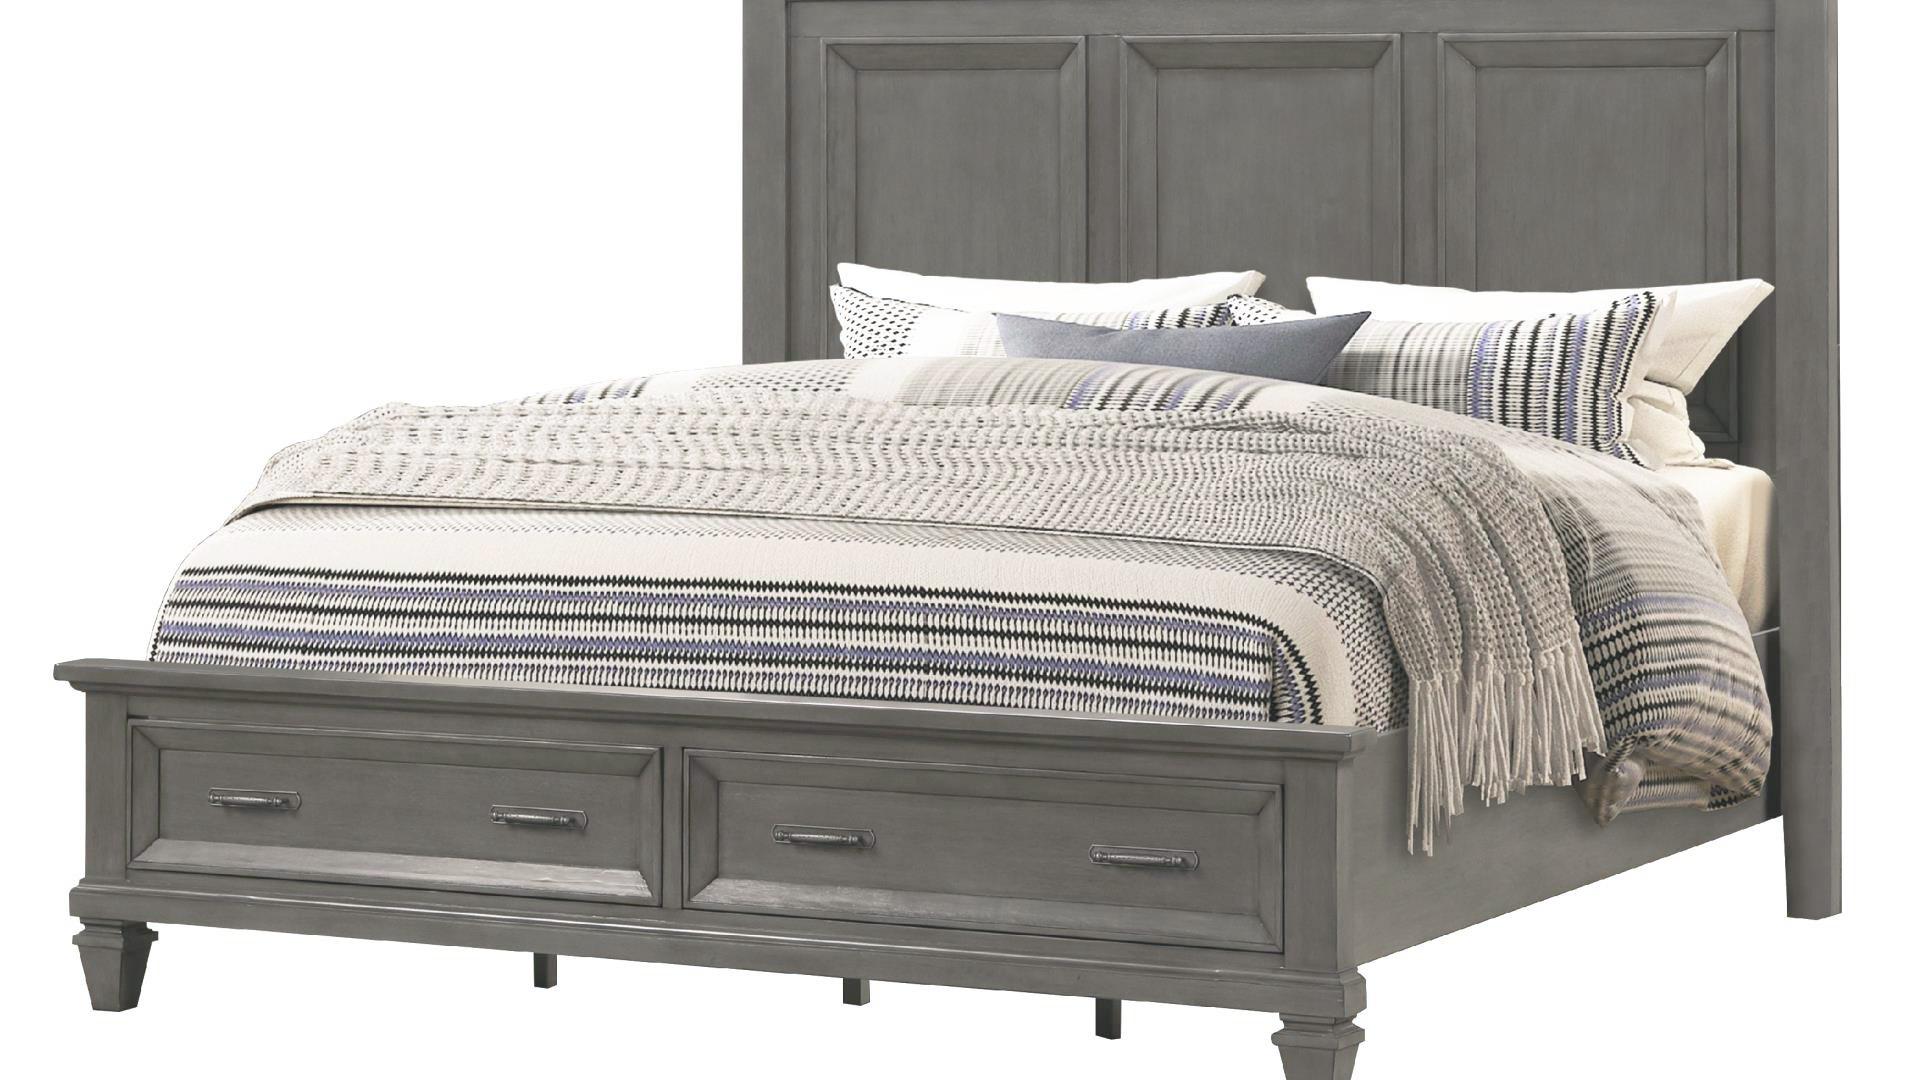 

    
Gray Solid Wood King Bedroom Set 4P HAMILTON Galaxy Home Classic Traditional
